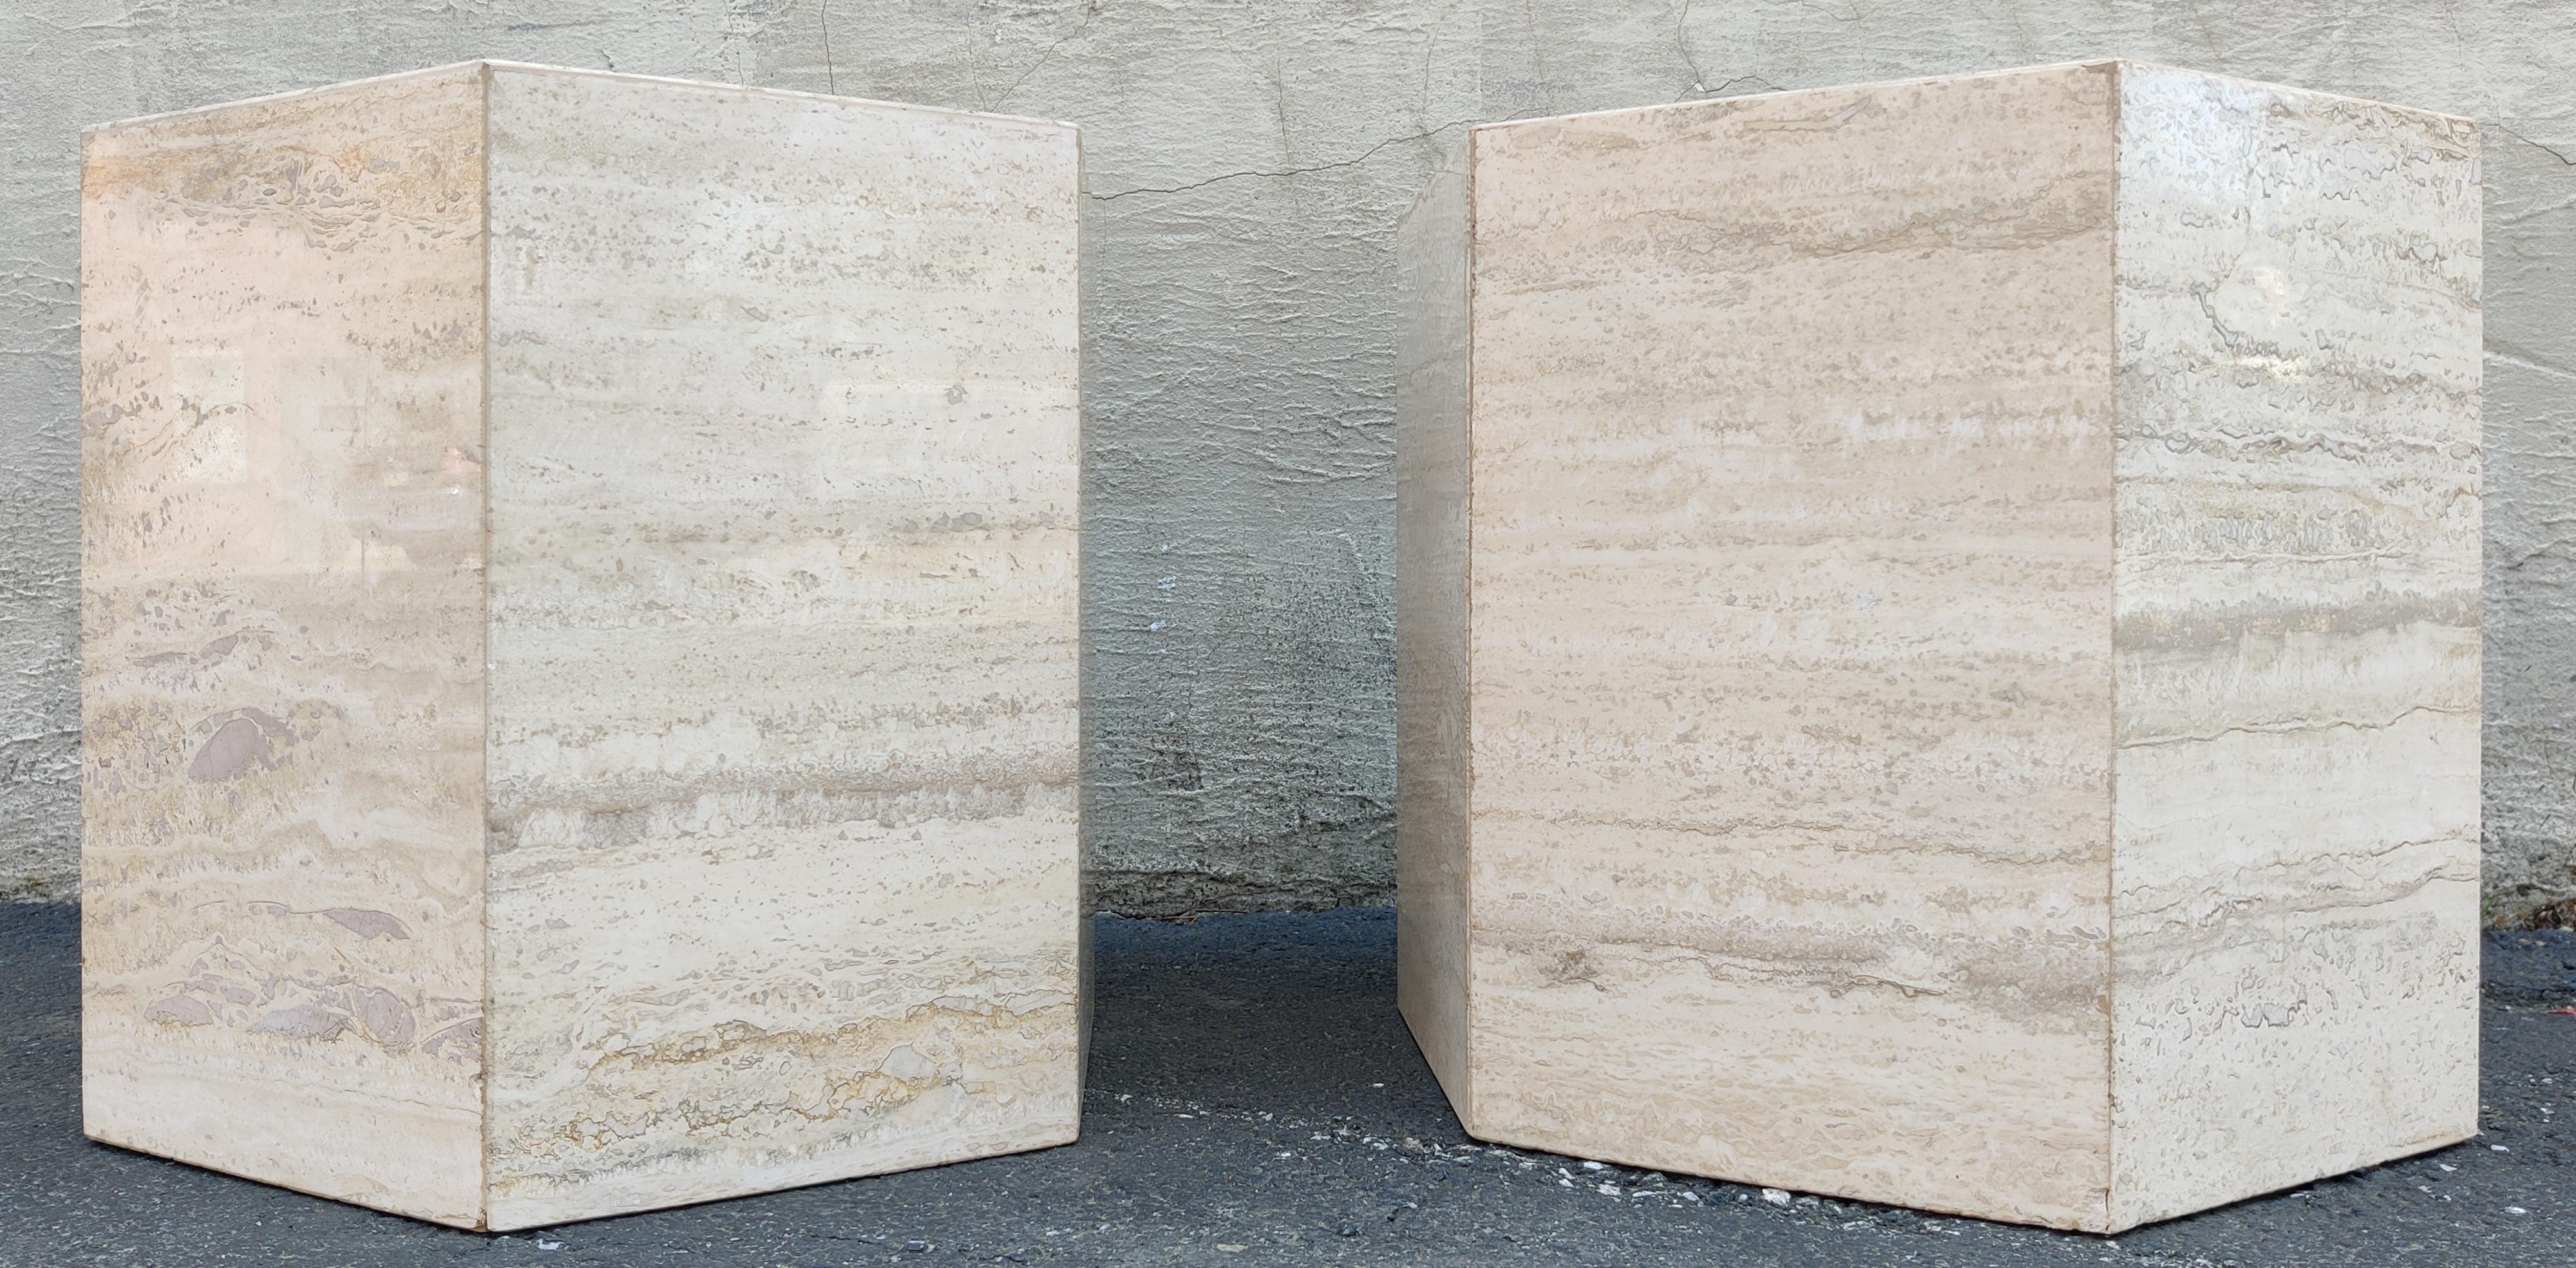 Late 20th Century Pair Matching Post-Modern Italian Travertine Marble Hexagonal Side Tables, 1970s For Sale